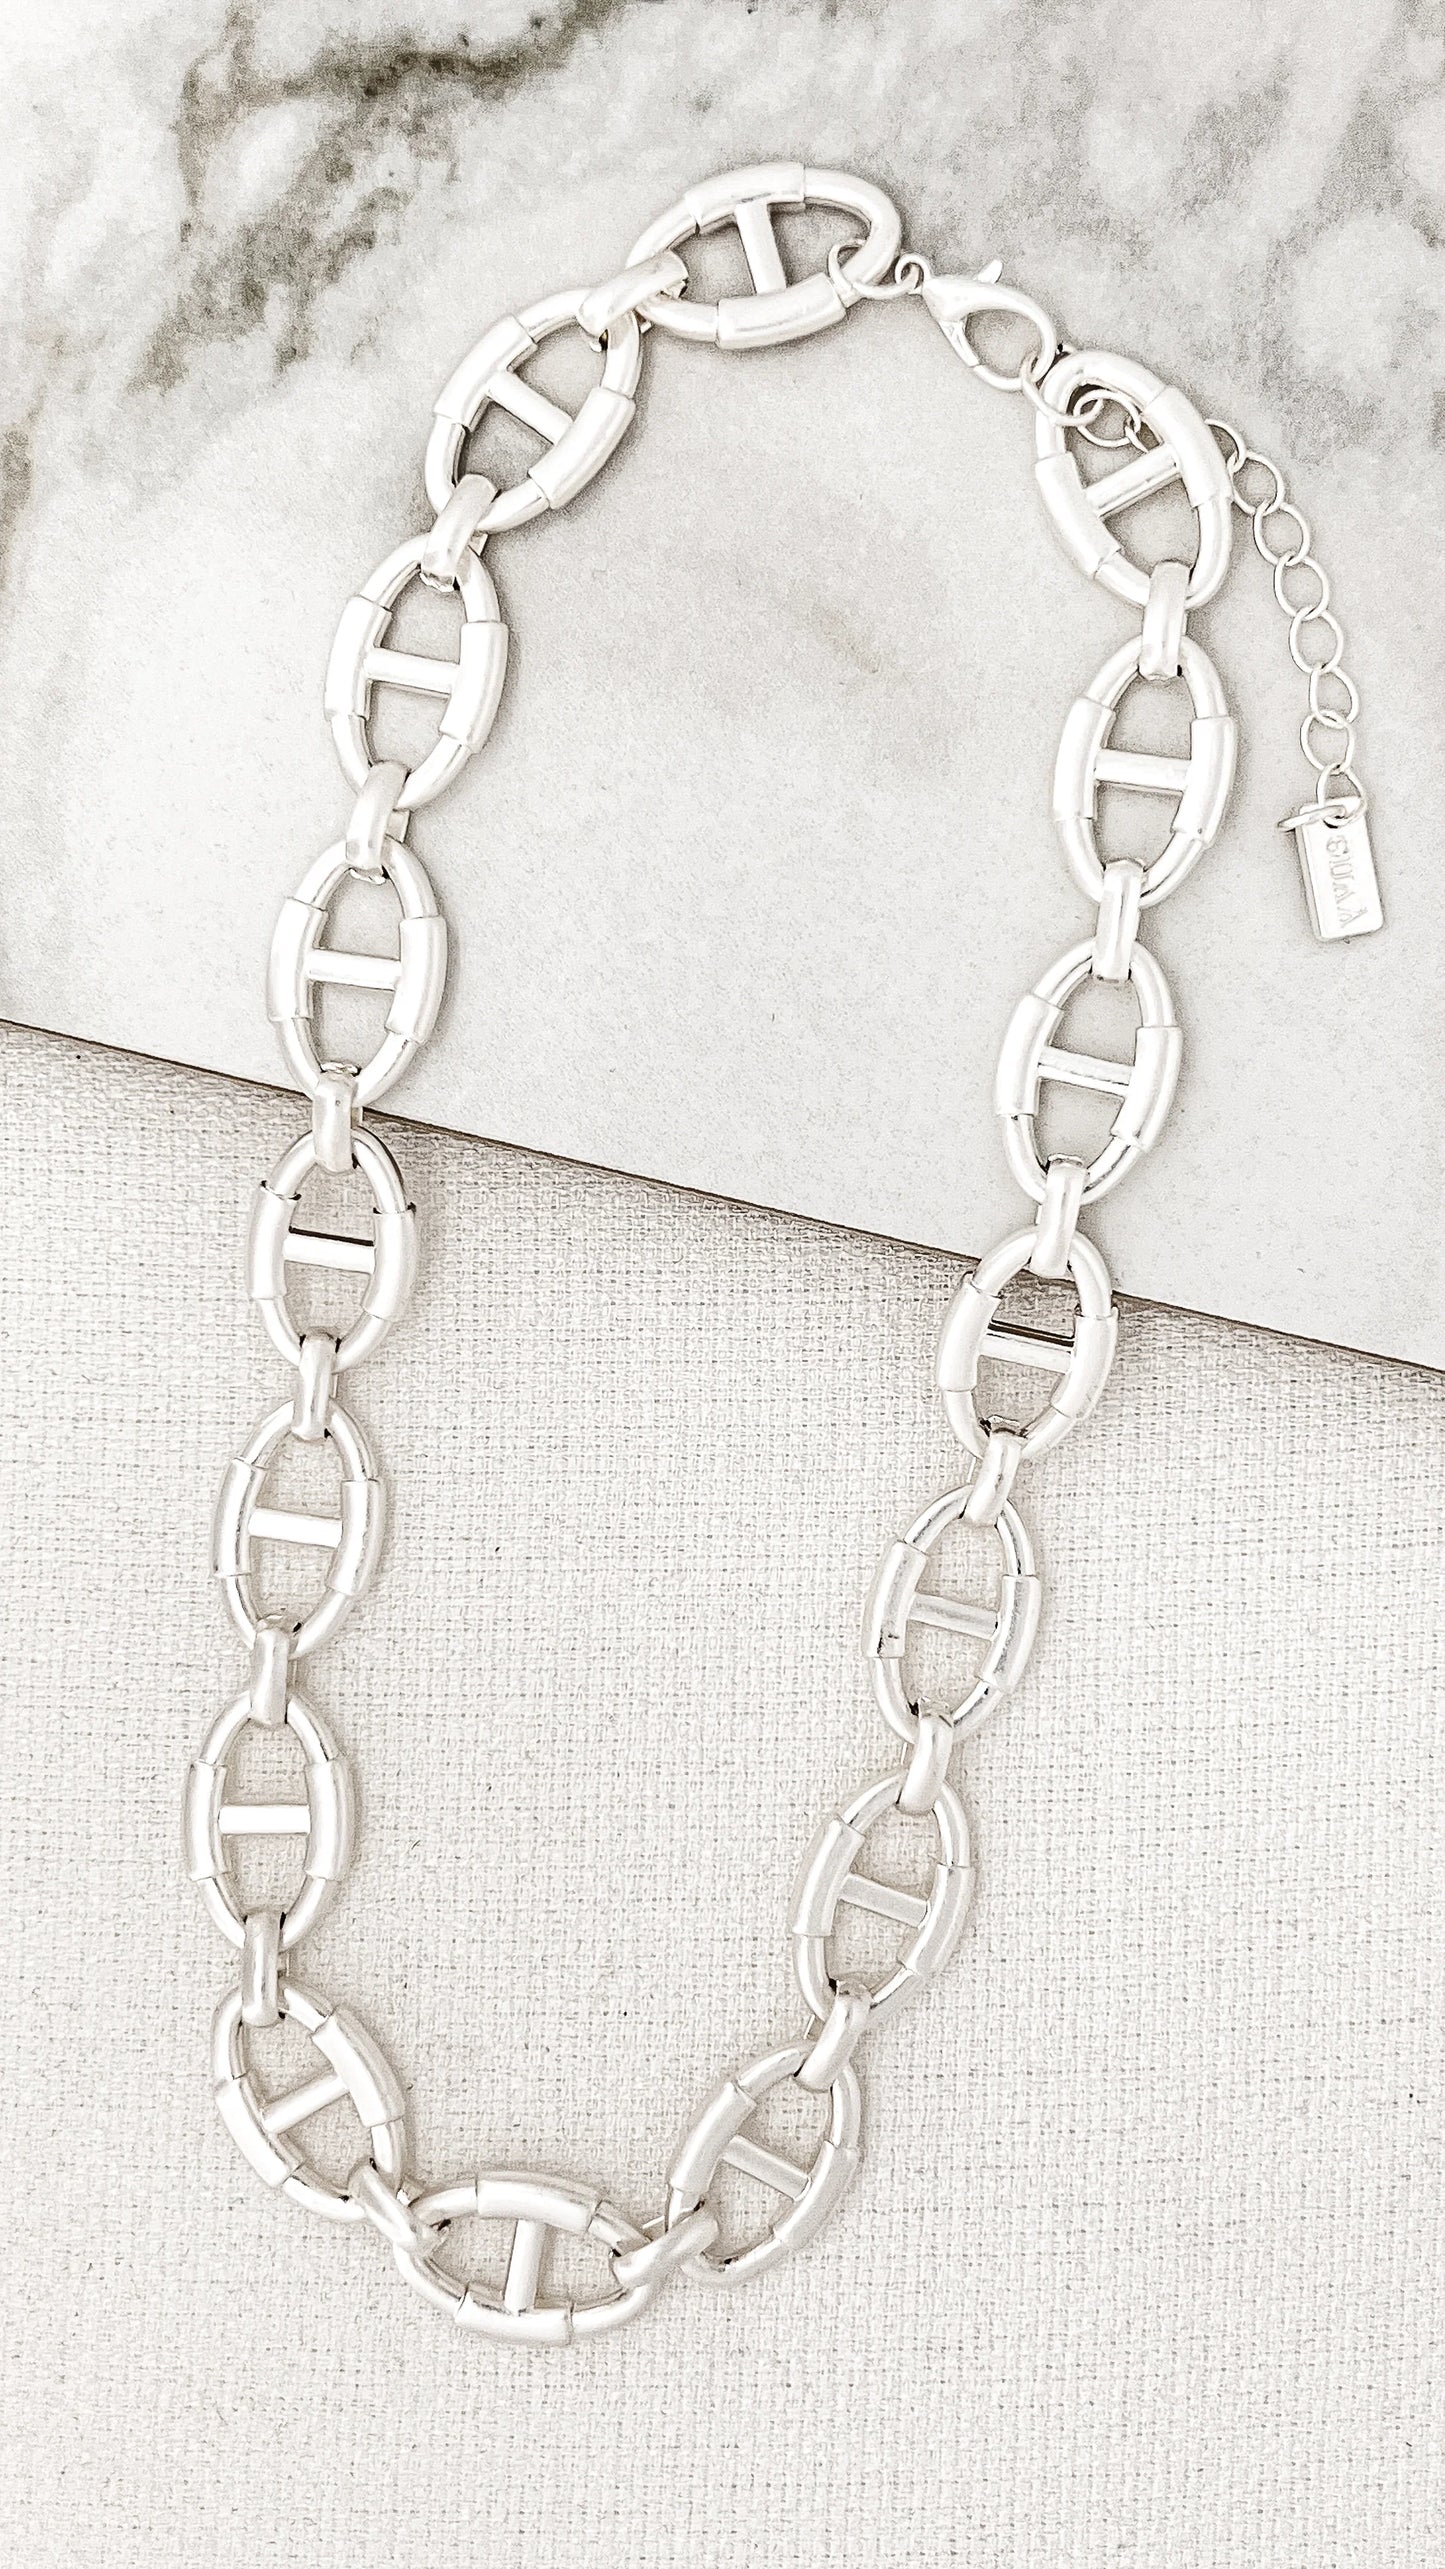 Envy Short Silver Chain Link Necklace